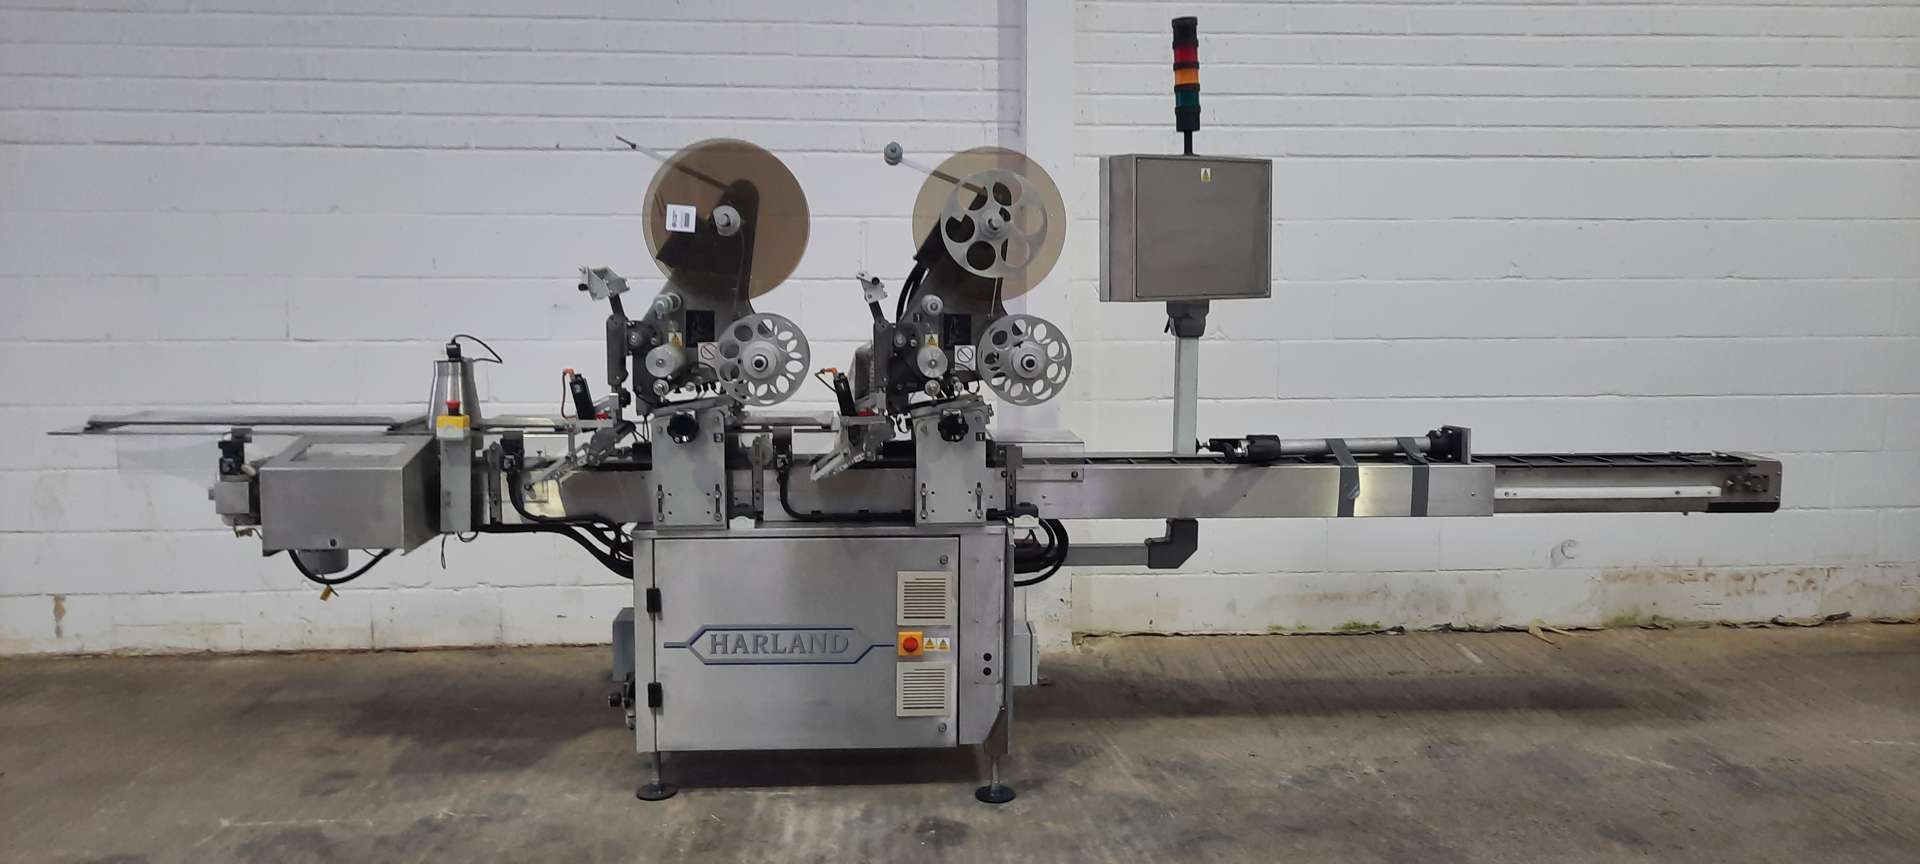 Harland Labeller MK 5 Sirius Automatic 2-Head Top Label Applicator with Comet Heads - Image 4 of 9